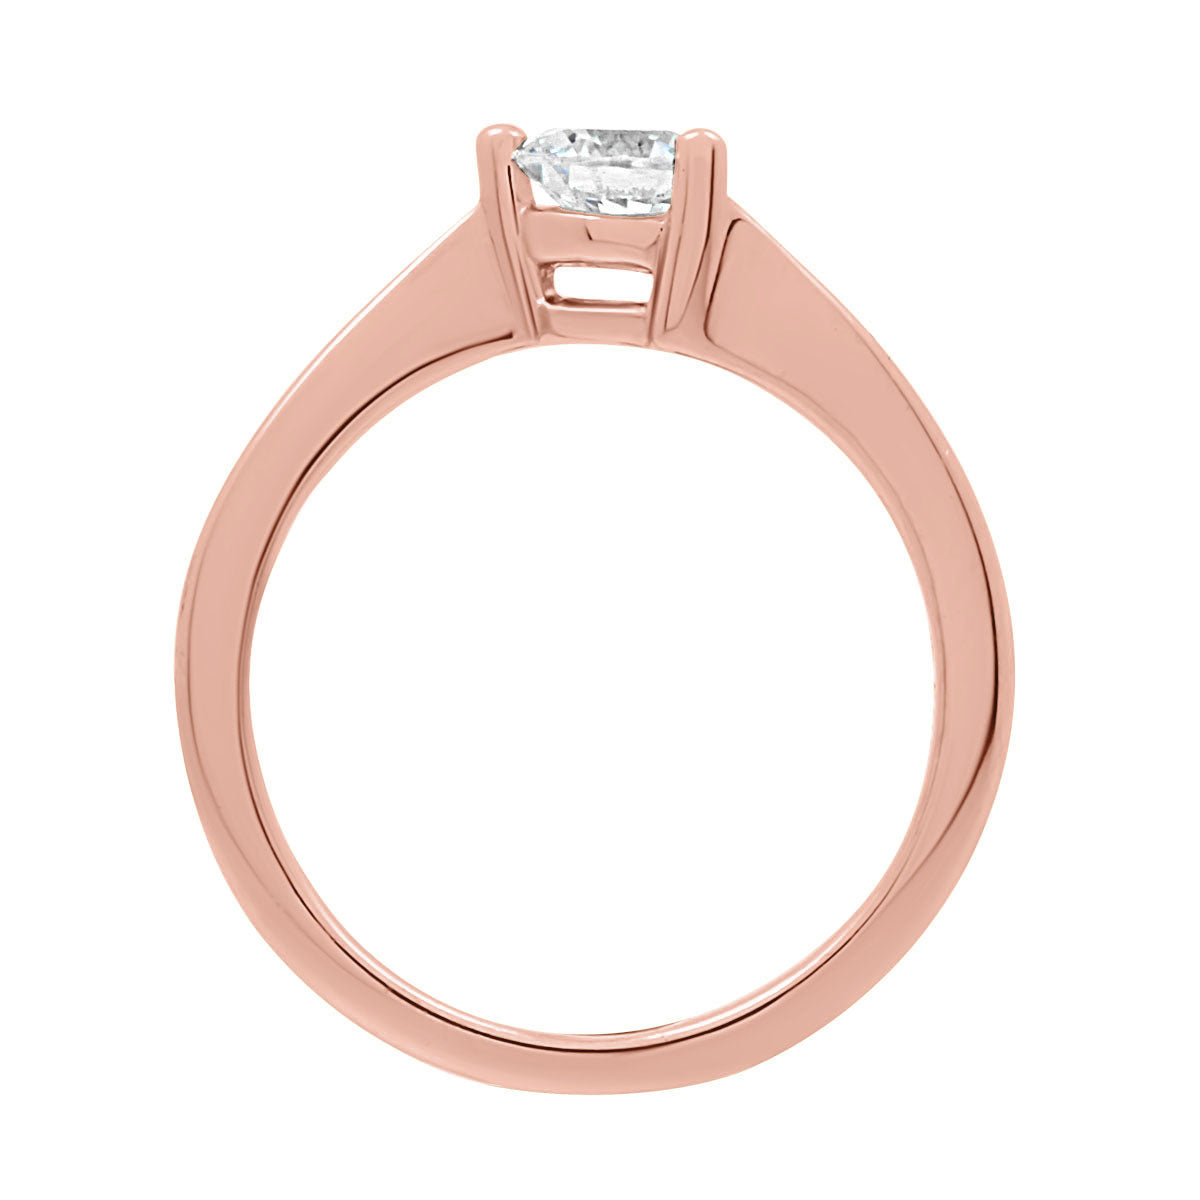 Three Claw Engagement Ring in rose gold standing in a vertical position